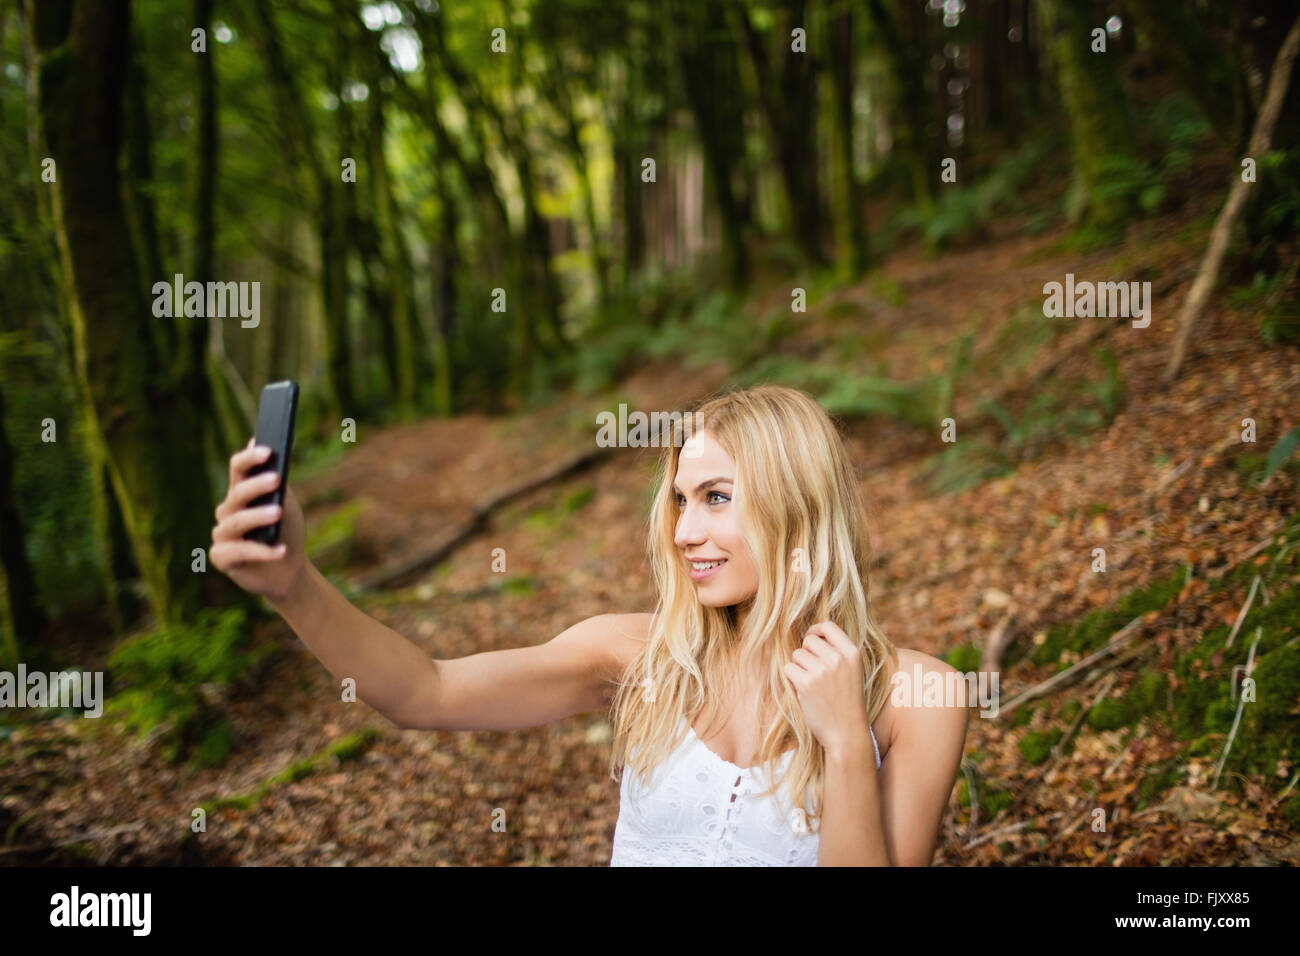 Blonde girl taking a selfie with her hair down - wide 9